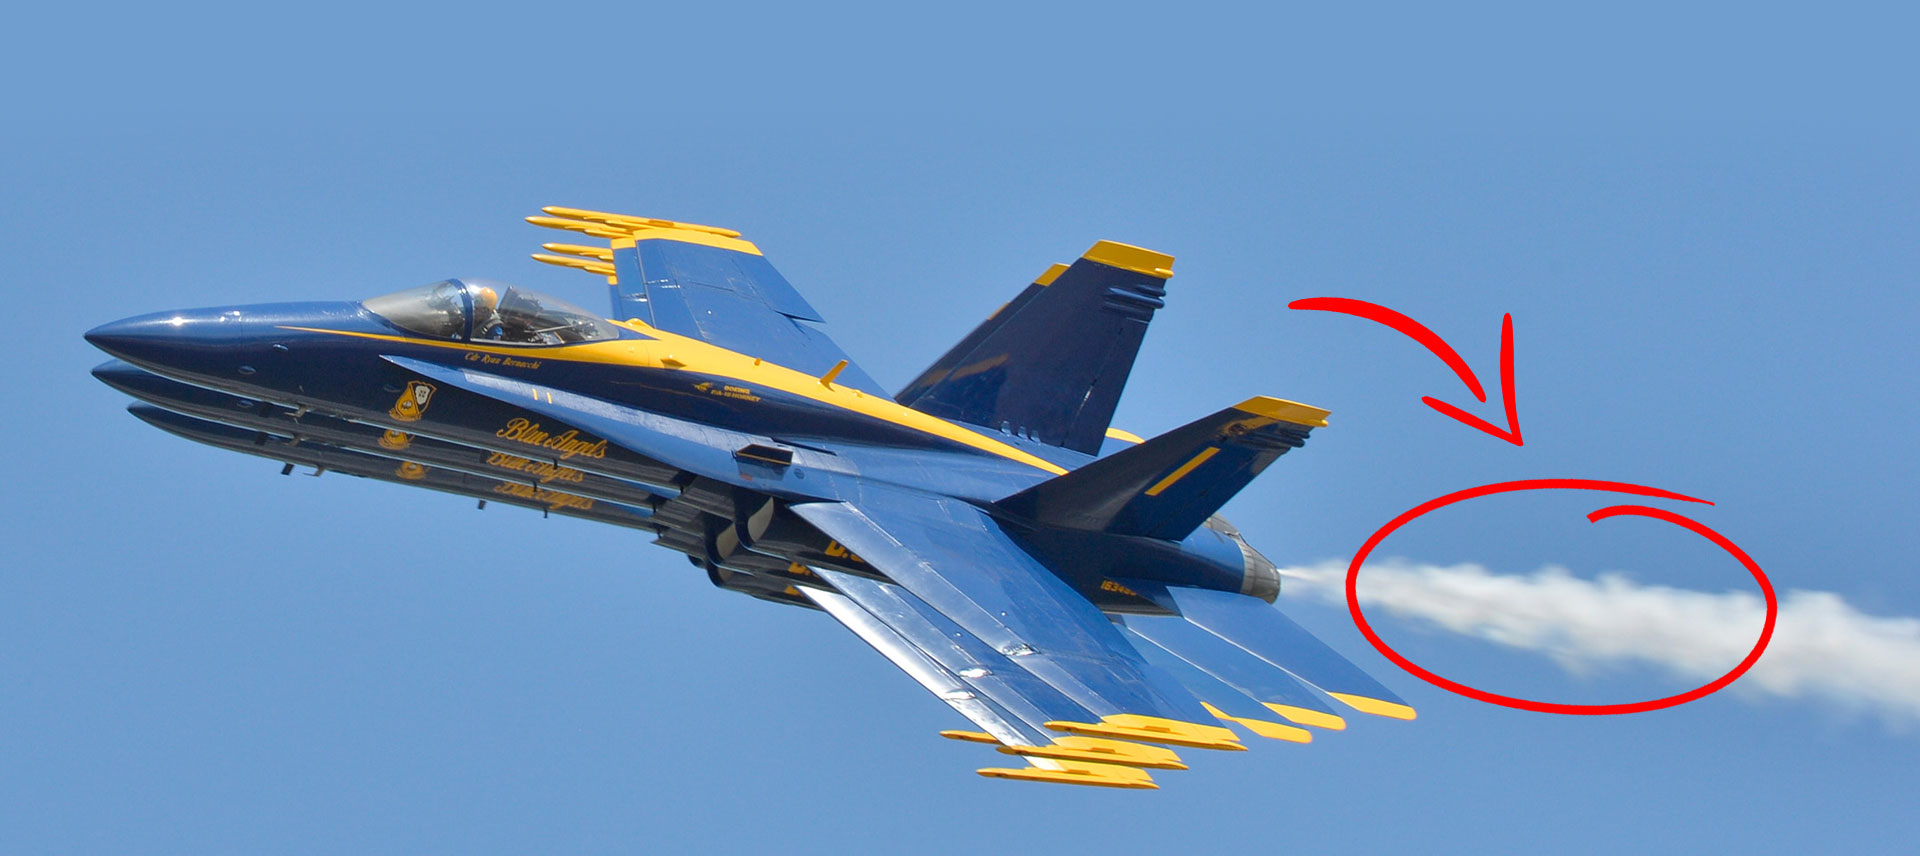 7 Fun About the Blue Angels - Harbor Museum